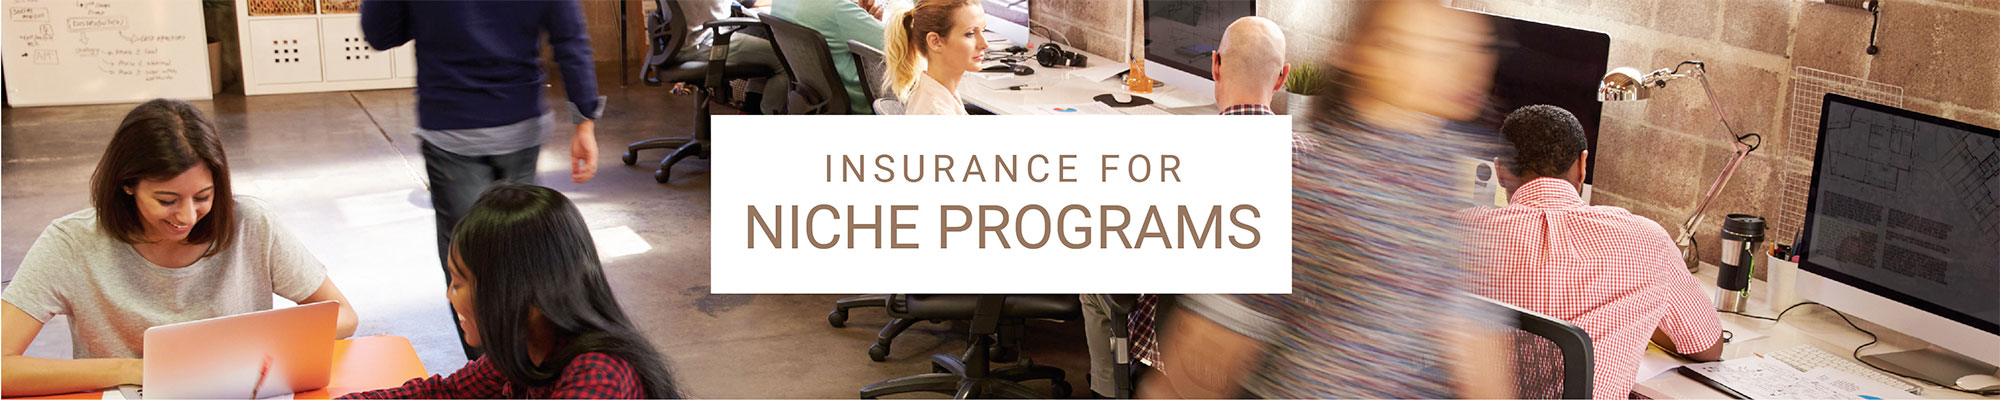 photo of office scene with text 'Insurance for Niche Programs'